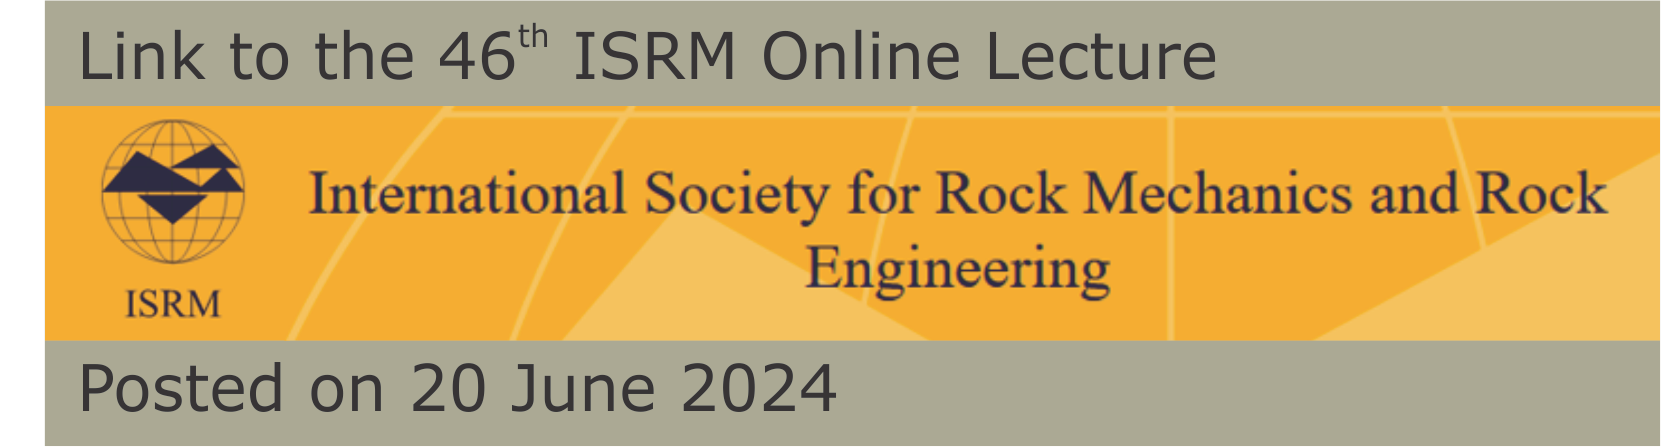 Link to 46th Online ISRM Levcture